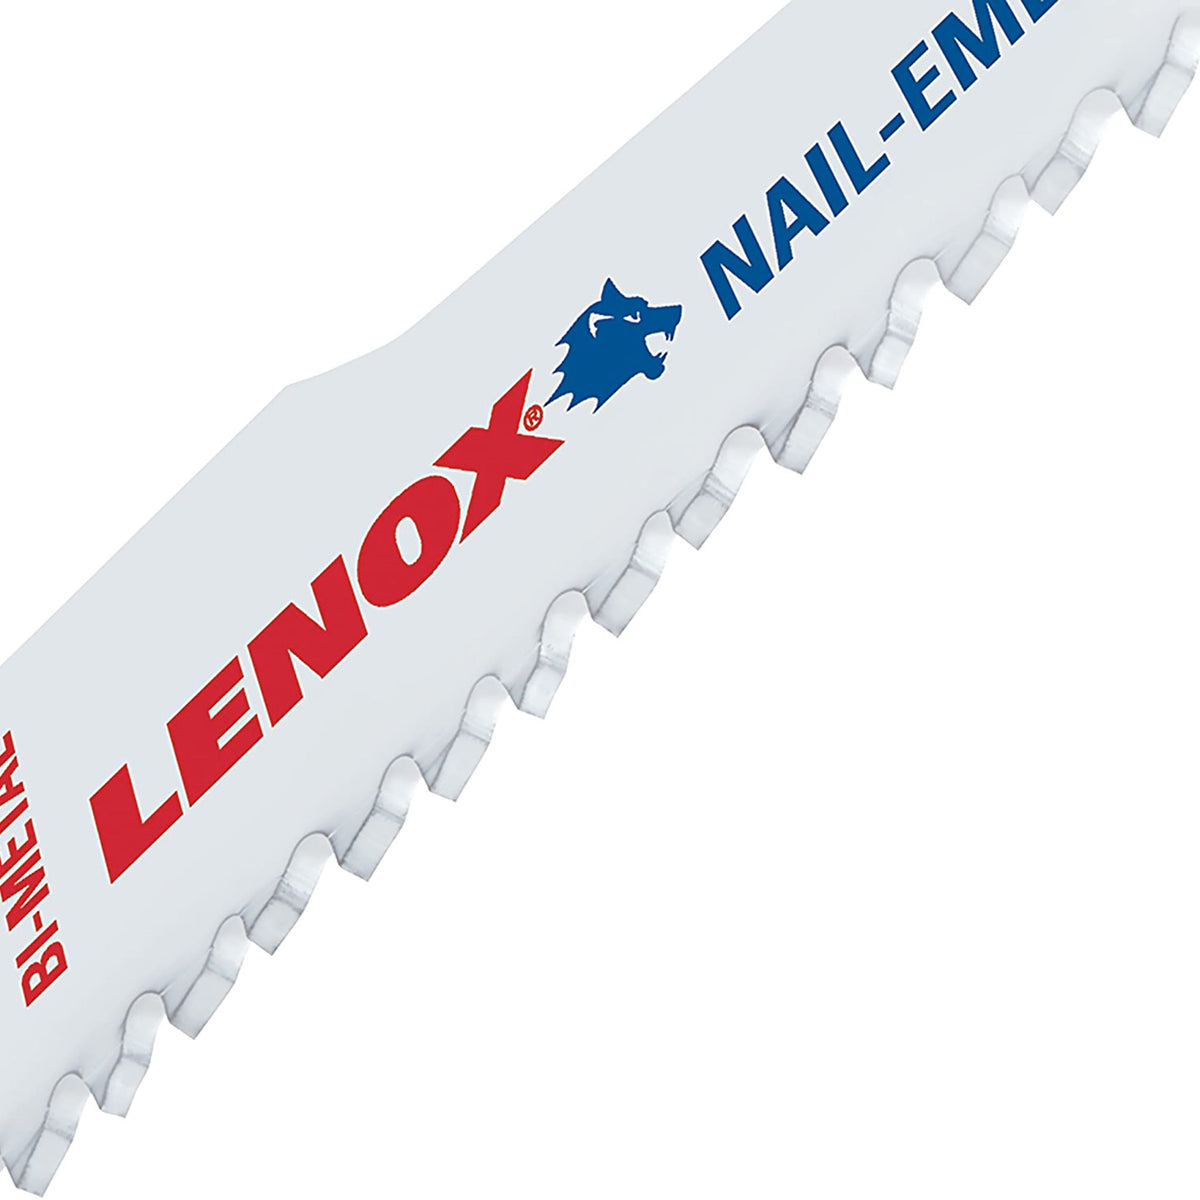 Lenox 12130835R Reciprocating 10/14 TPI Saw Blade, General Purpose, 8-inch, 5 Pack